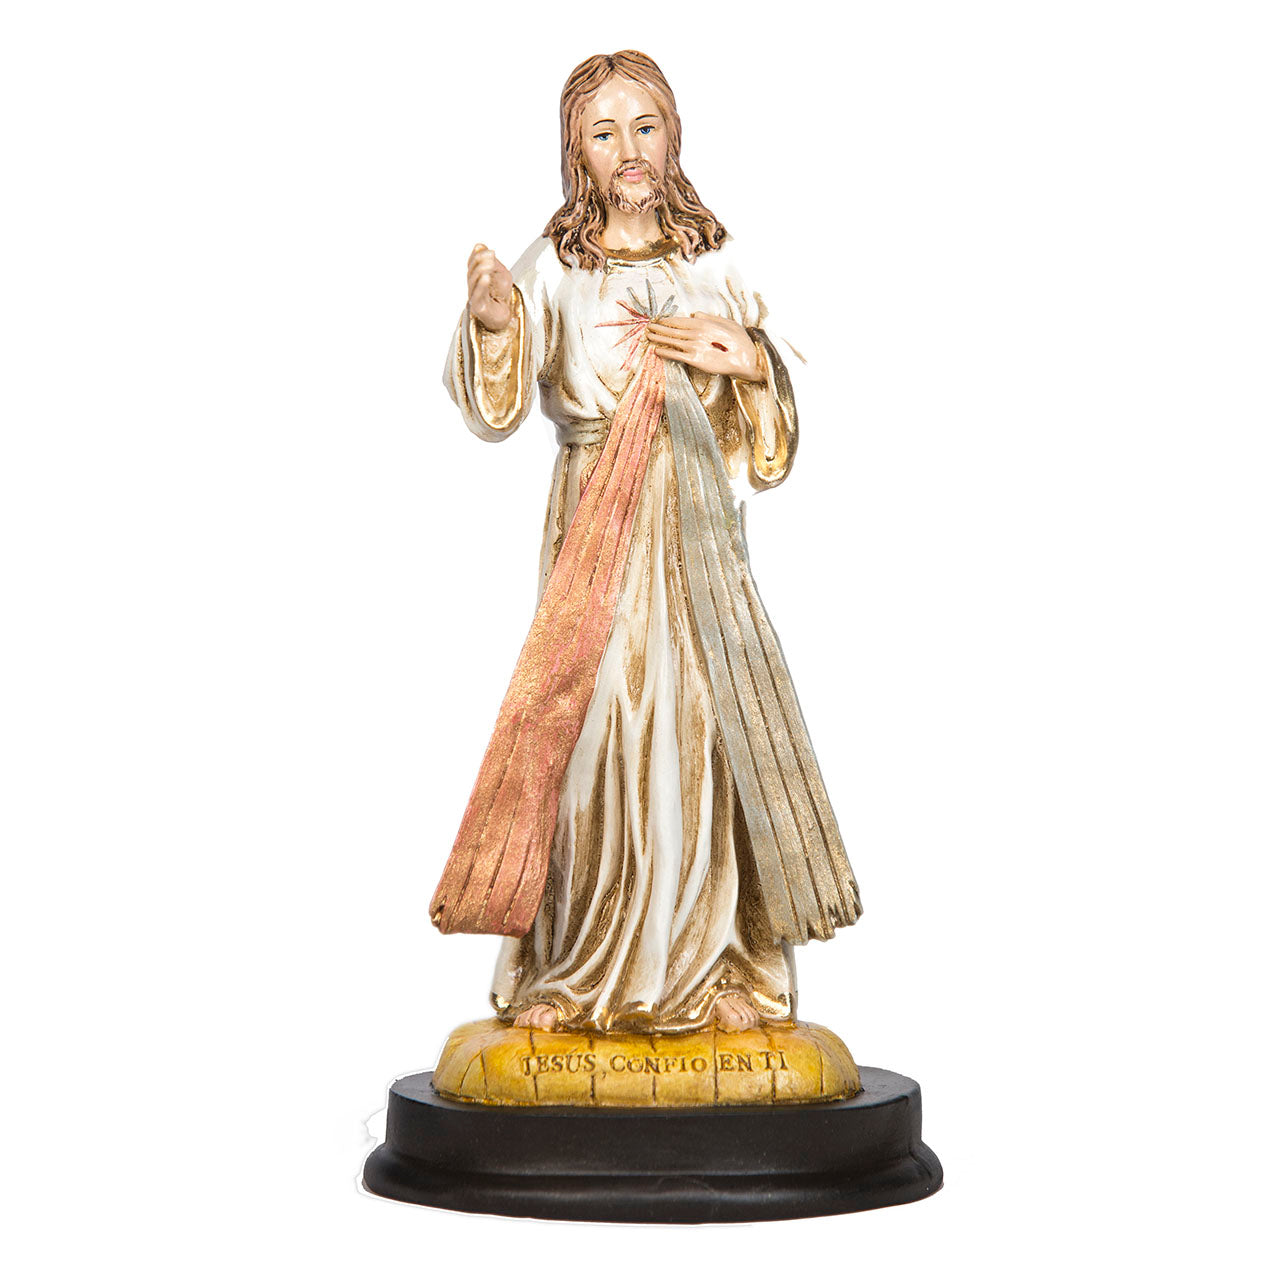 Statue of Divine Mercy – The Catholic Gift Store